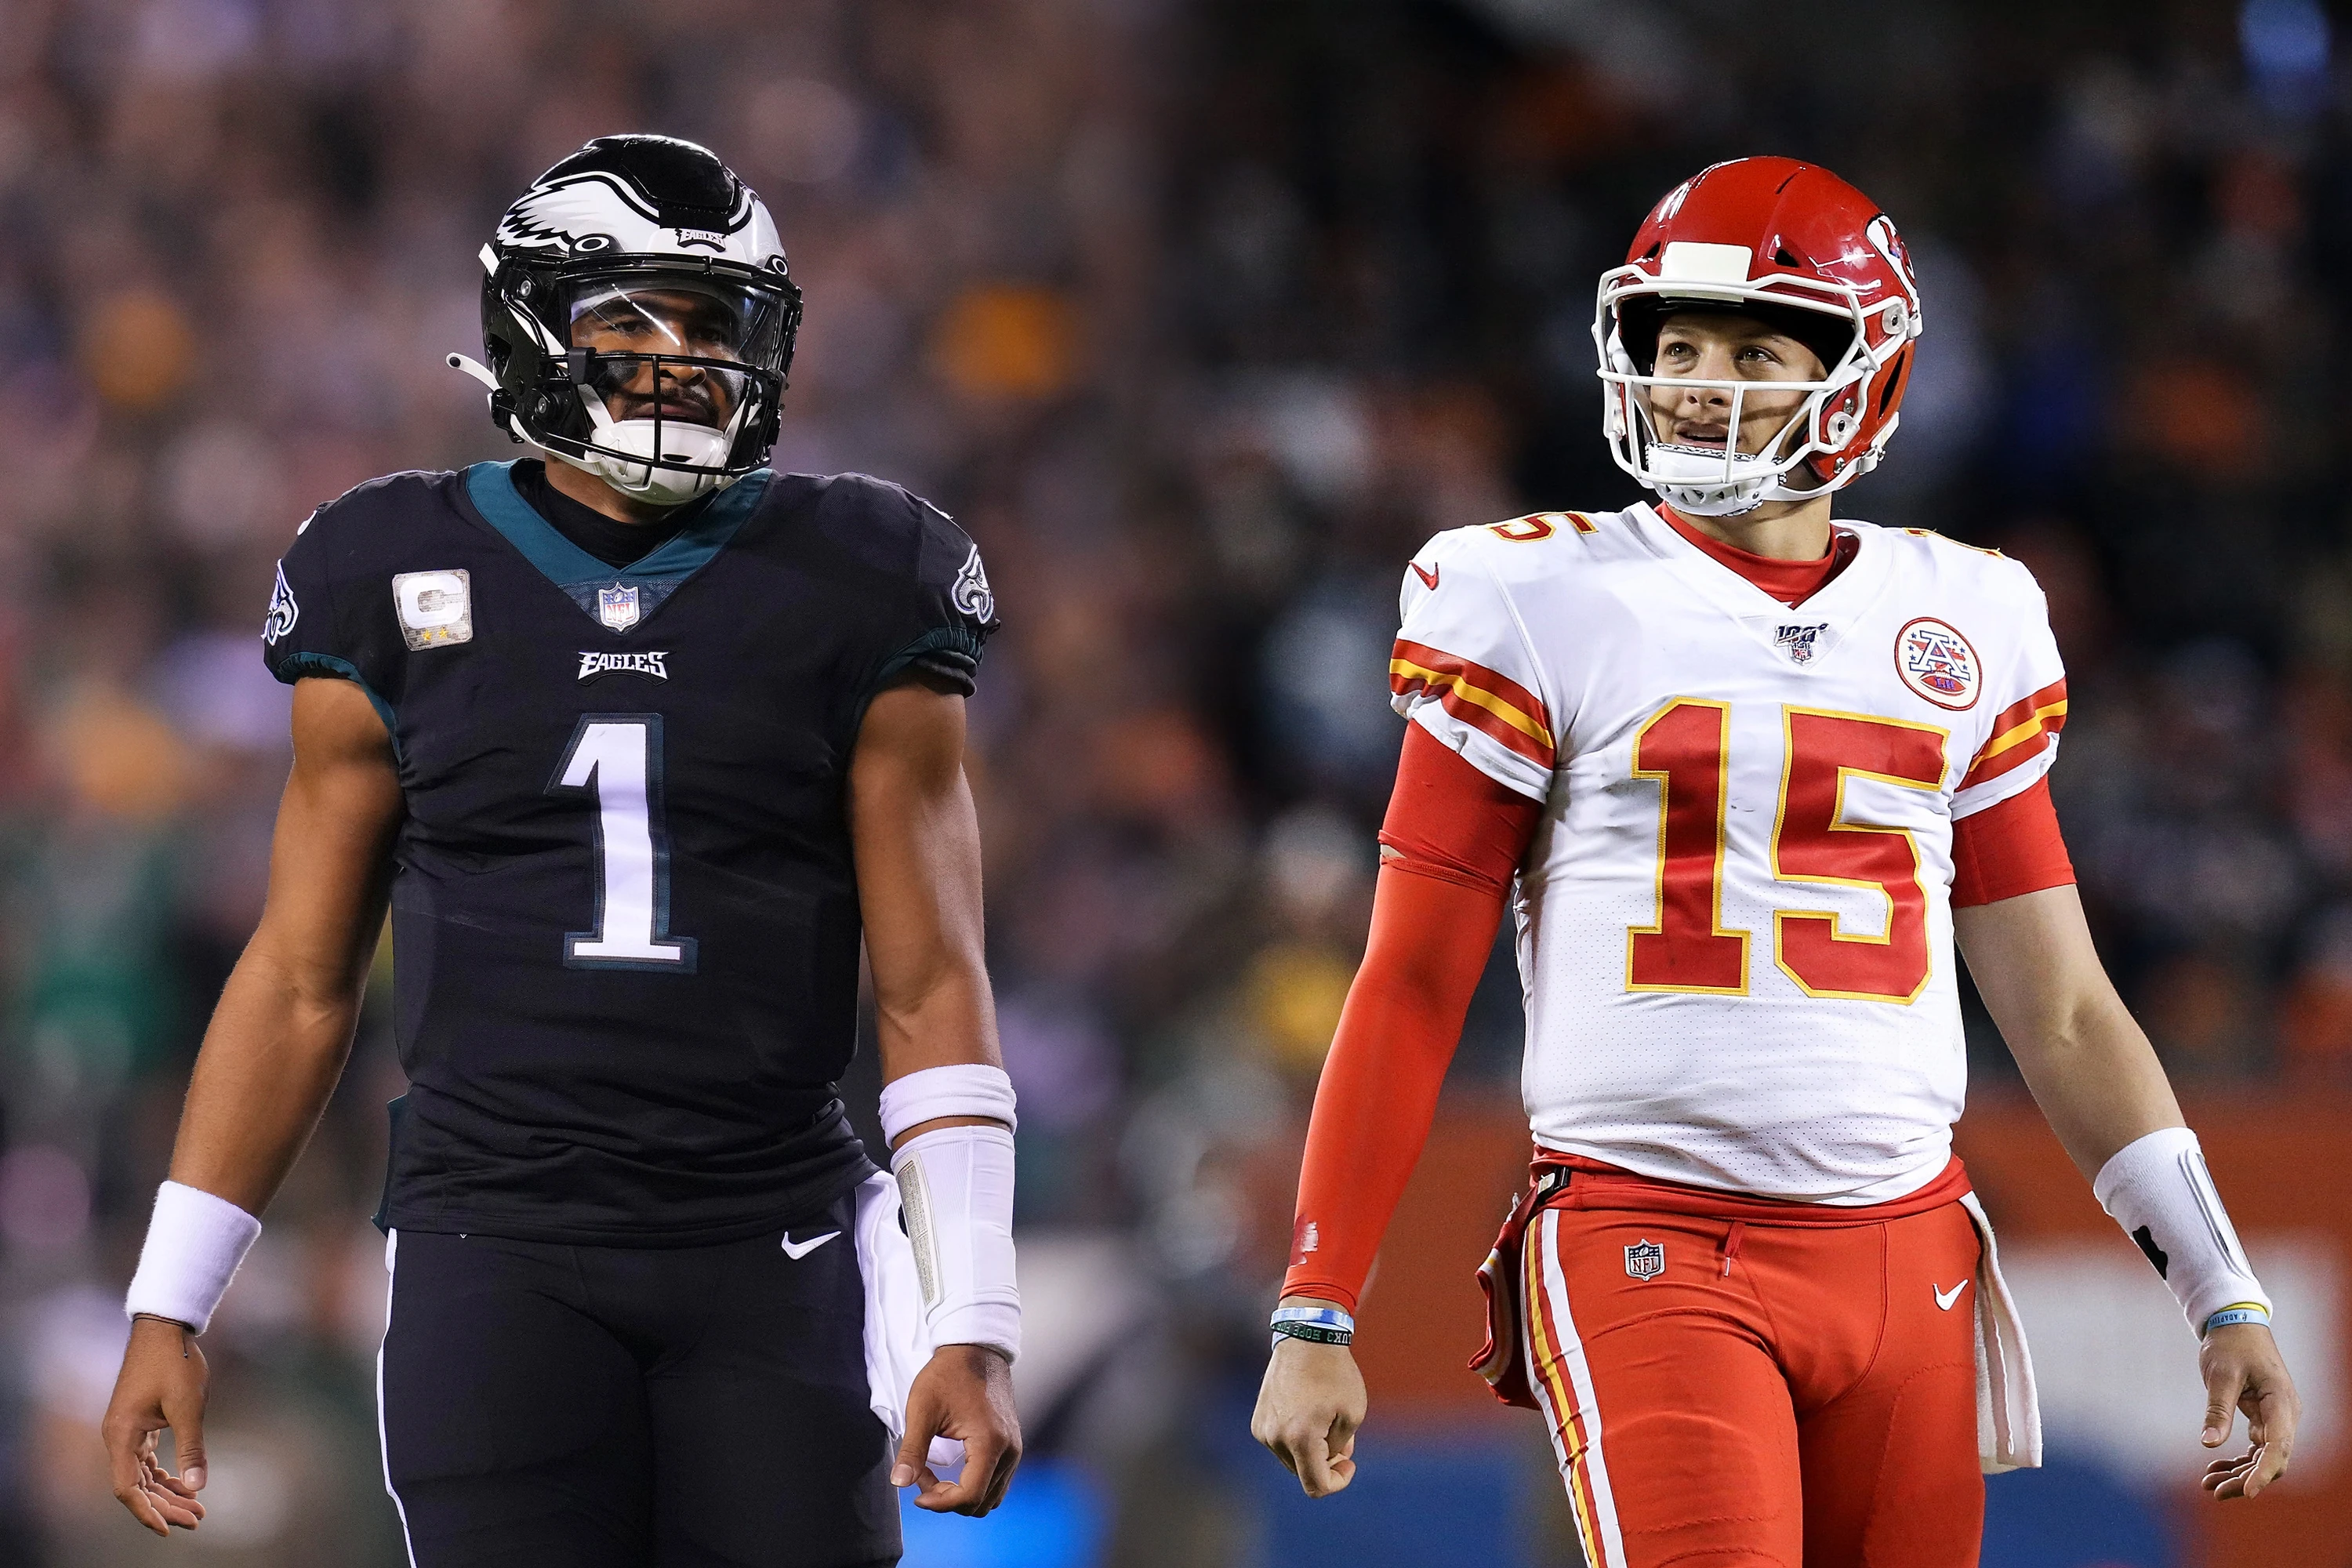 Best NFL Prop Bets for Chiefs vs. Raiders in Week 18